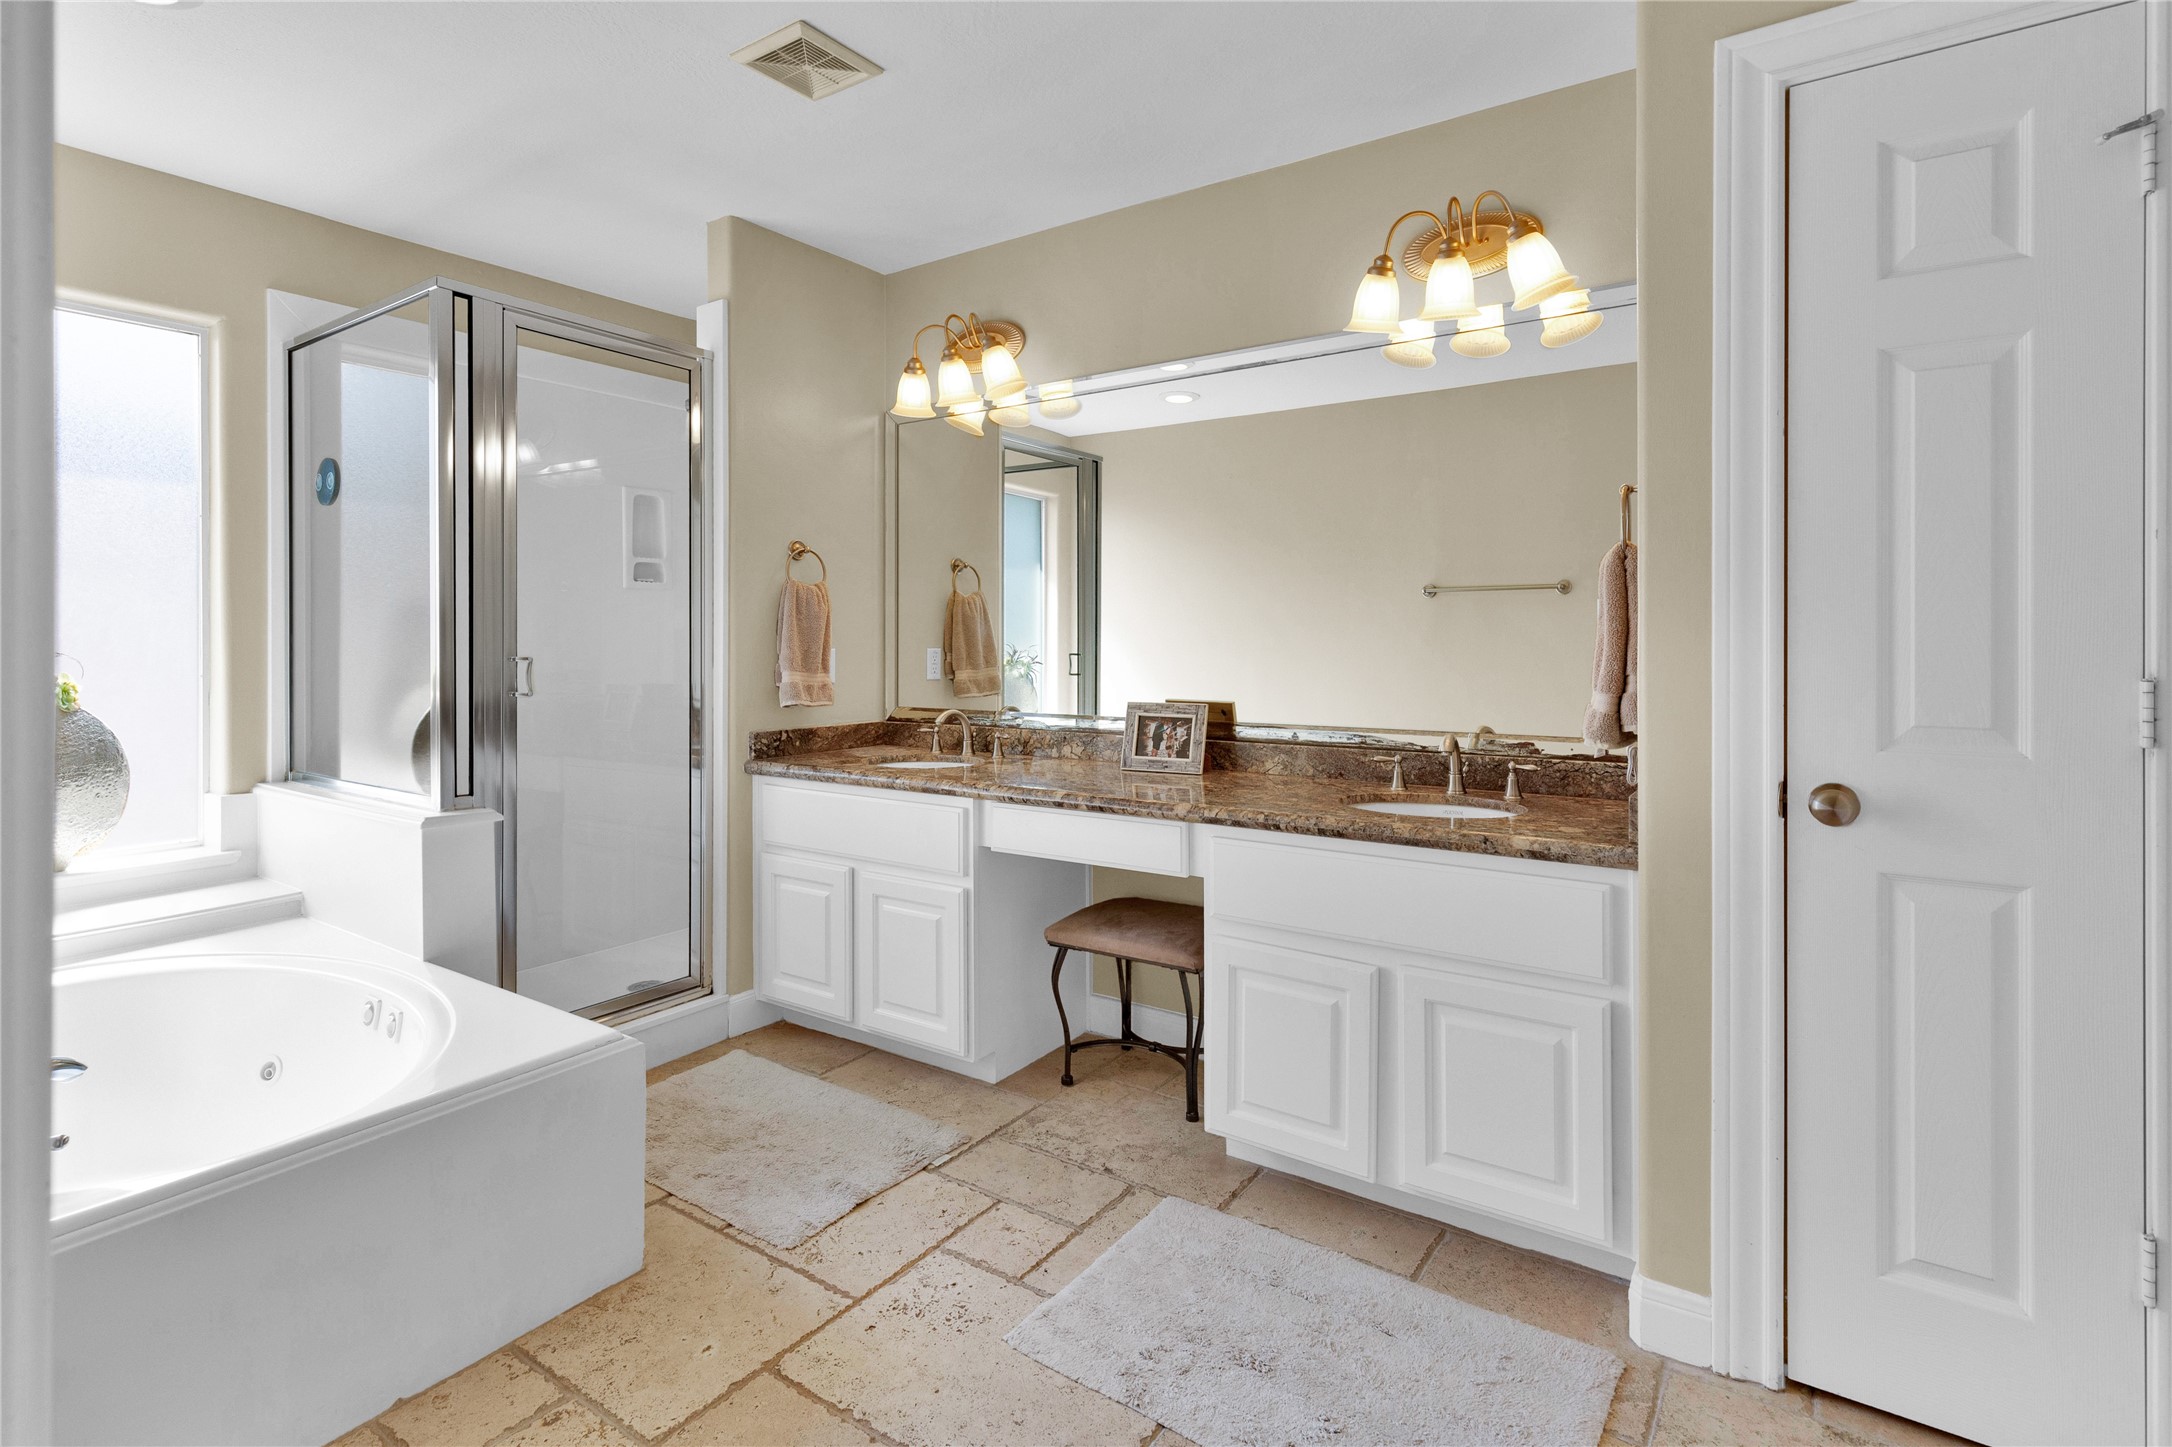 Primary bathroom has vanity, double sinks, soaking tub and a separate shower.